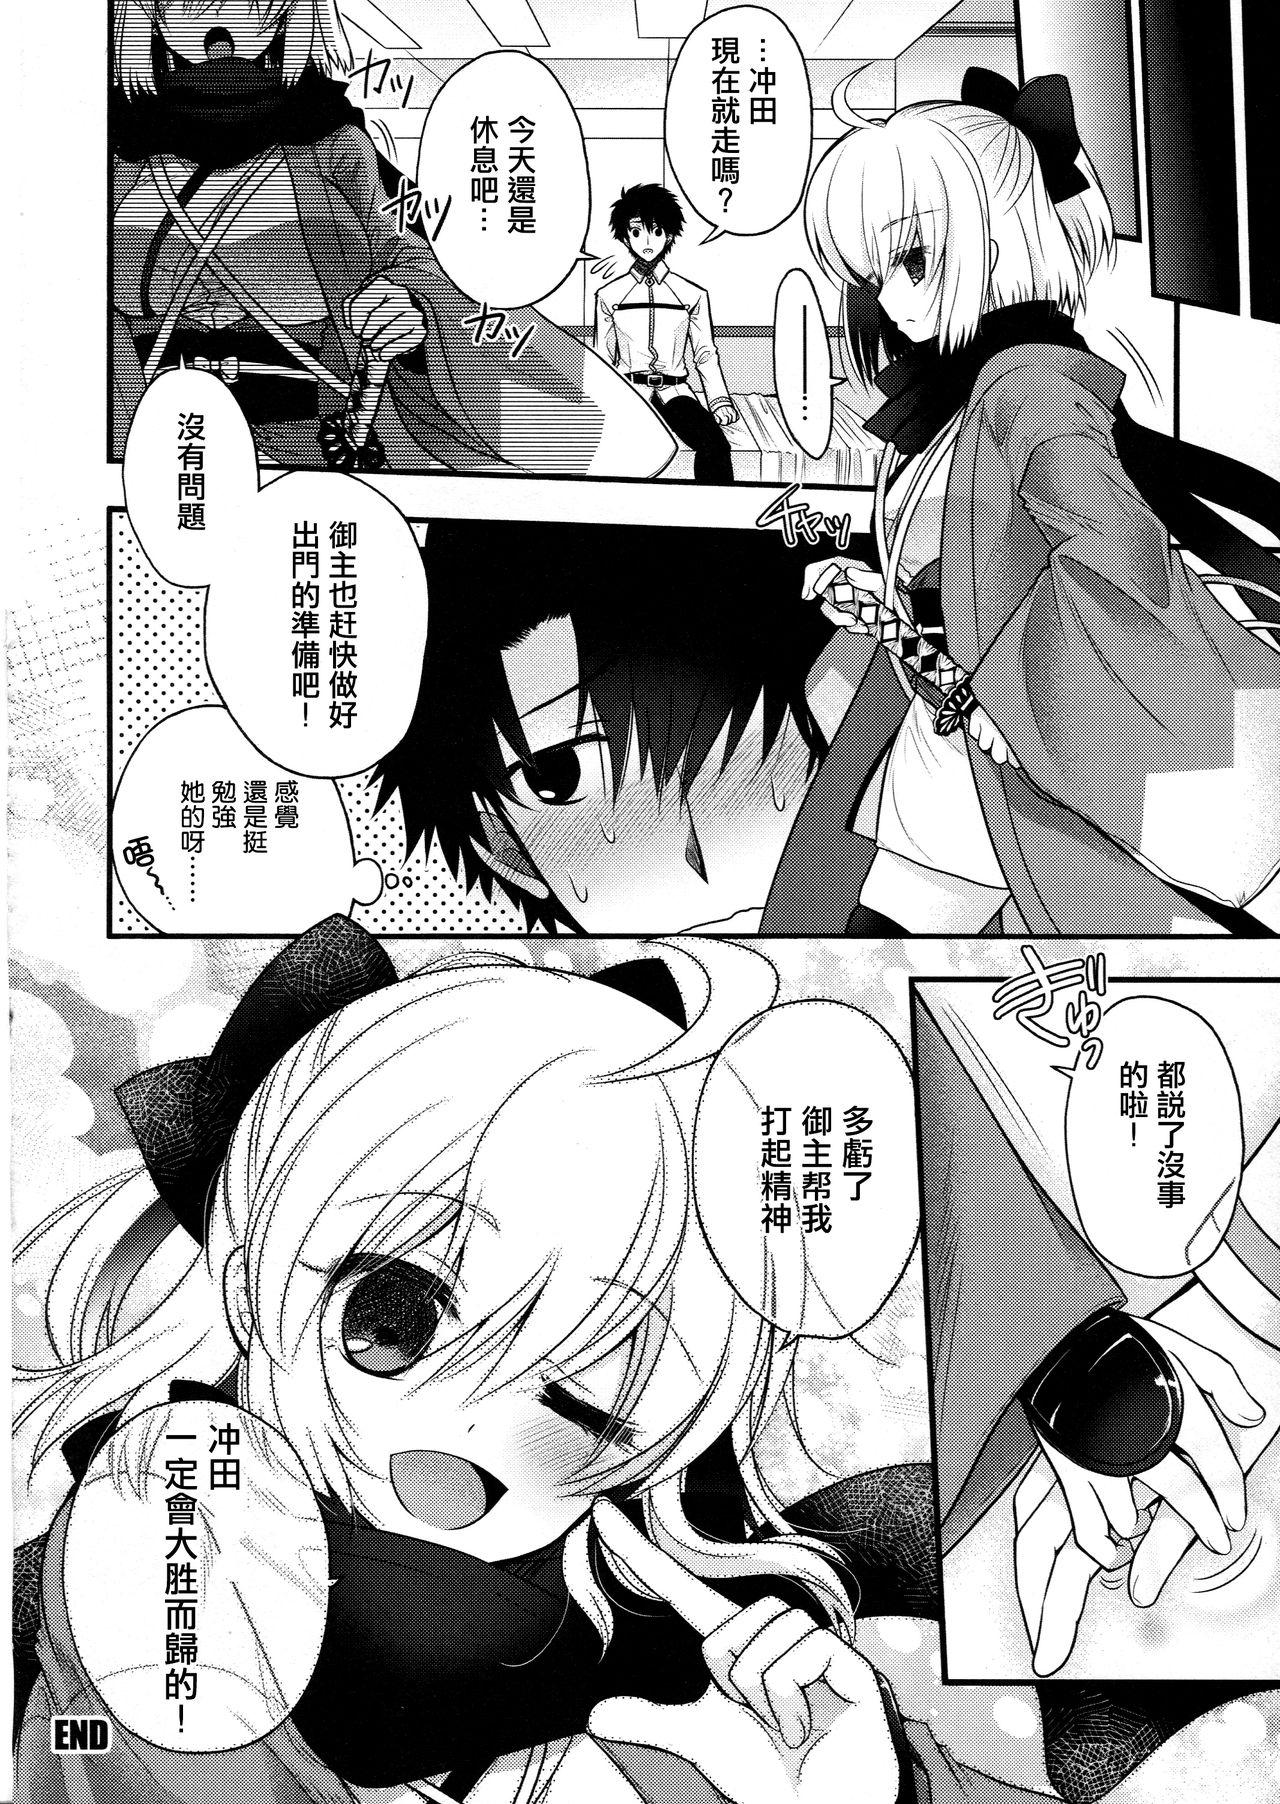 Trans My Room My Love - Fate grand order Porn - Page 12